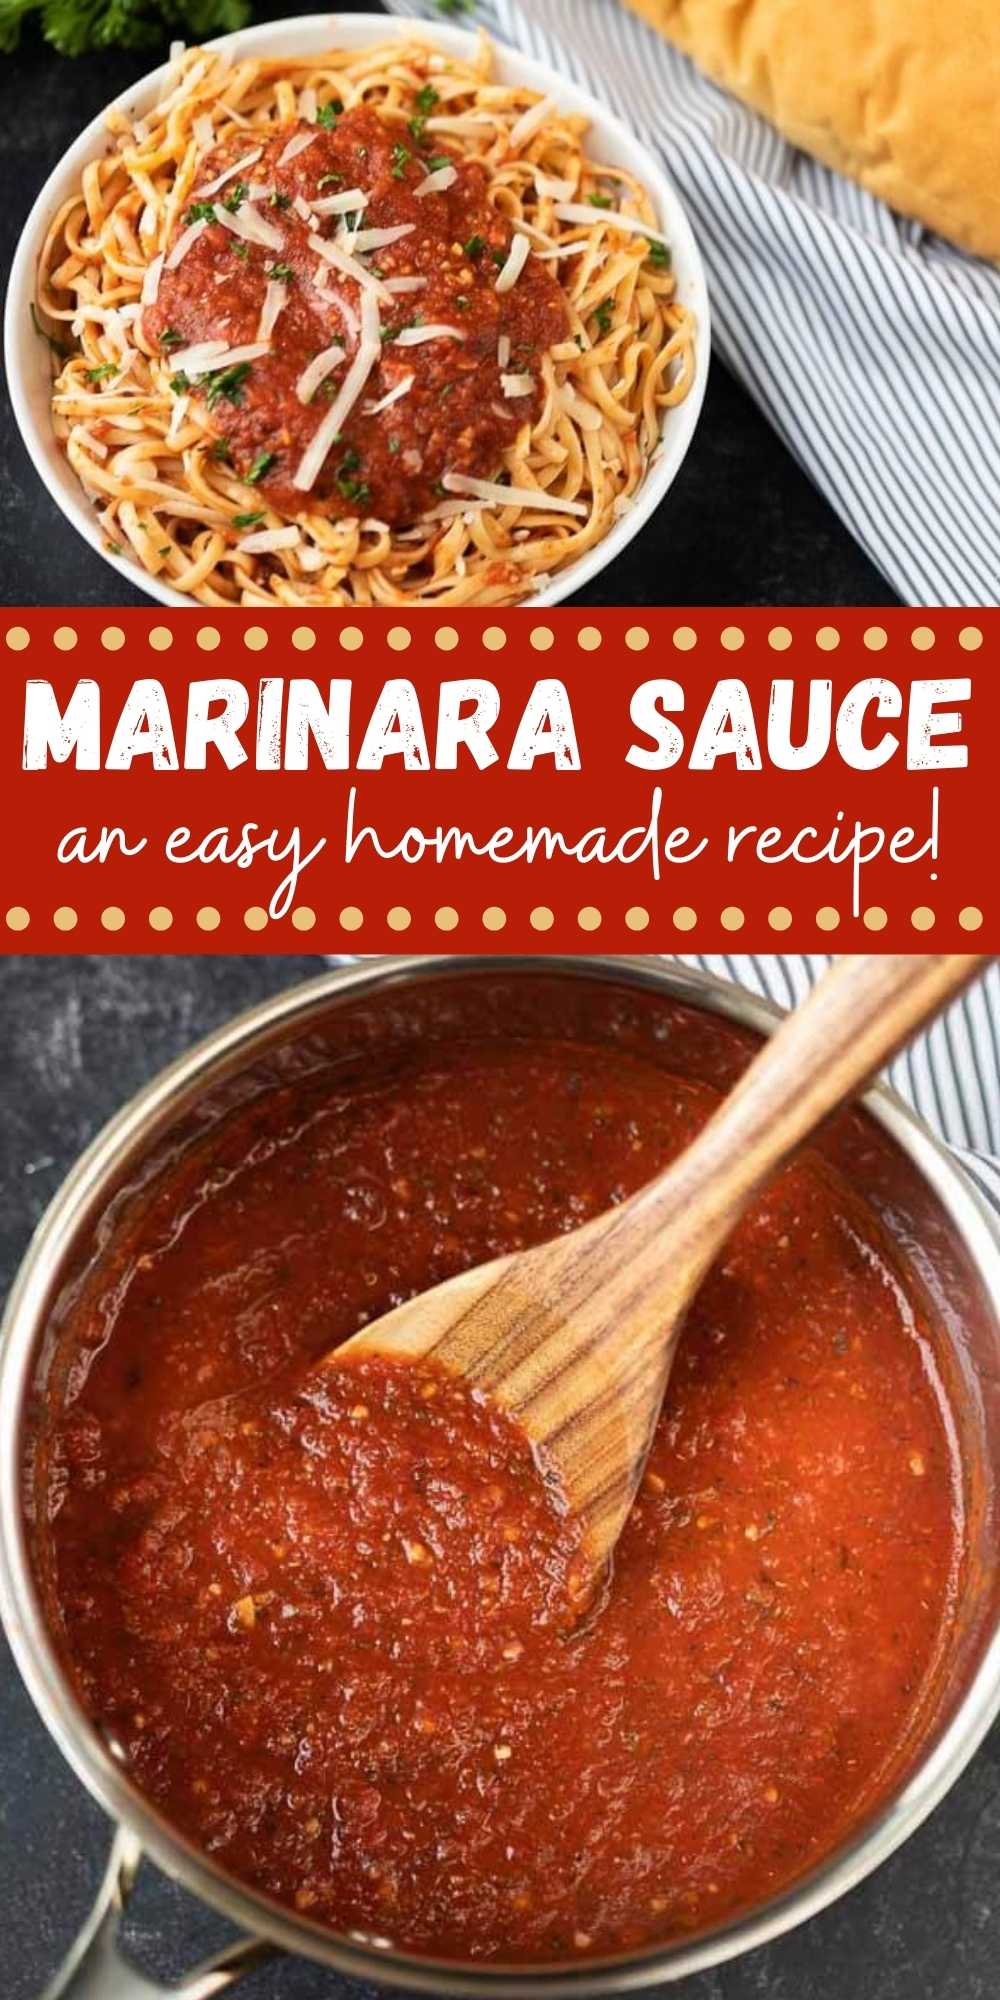 This homemade marinara sauce recipe is easy to make in only 15 minutes. This easy recipe is gluten-free and is the best and the easiest homemade marinara sauce made with canned tomatoes. #eatingonadime #marinararecipes #saucerecipes #Italianrecipes 